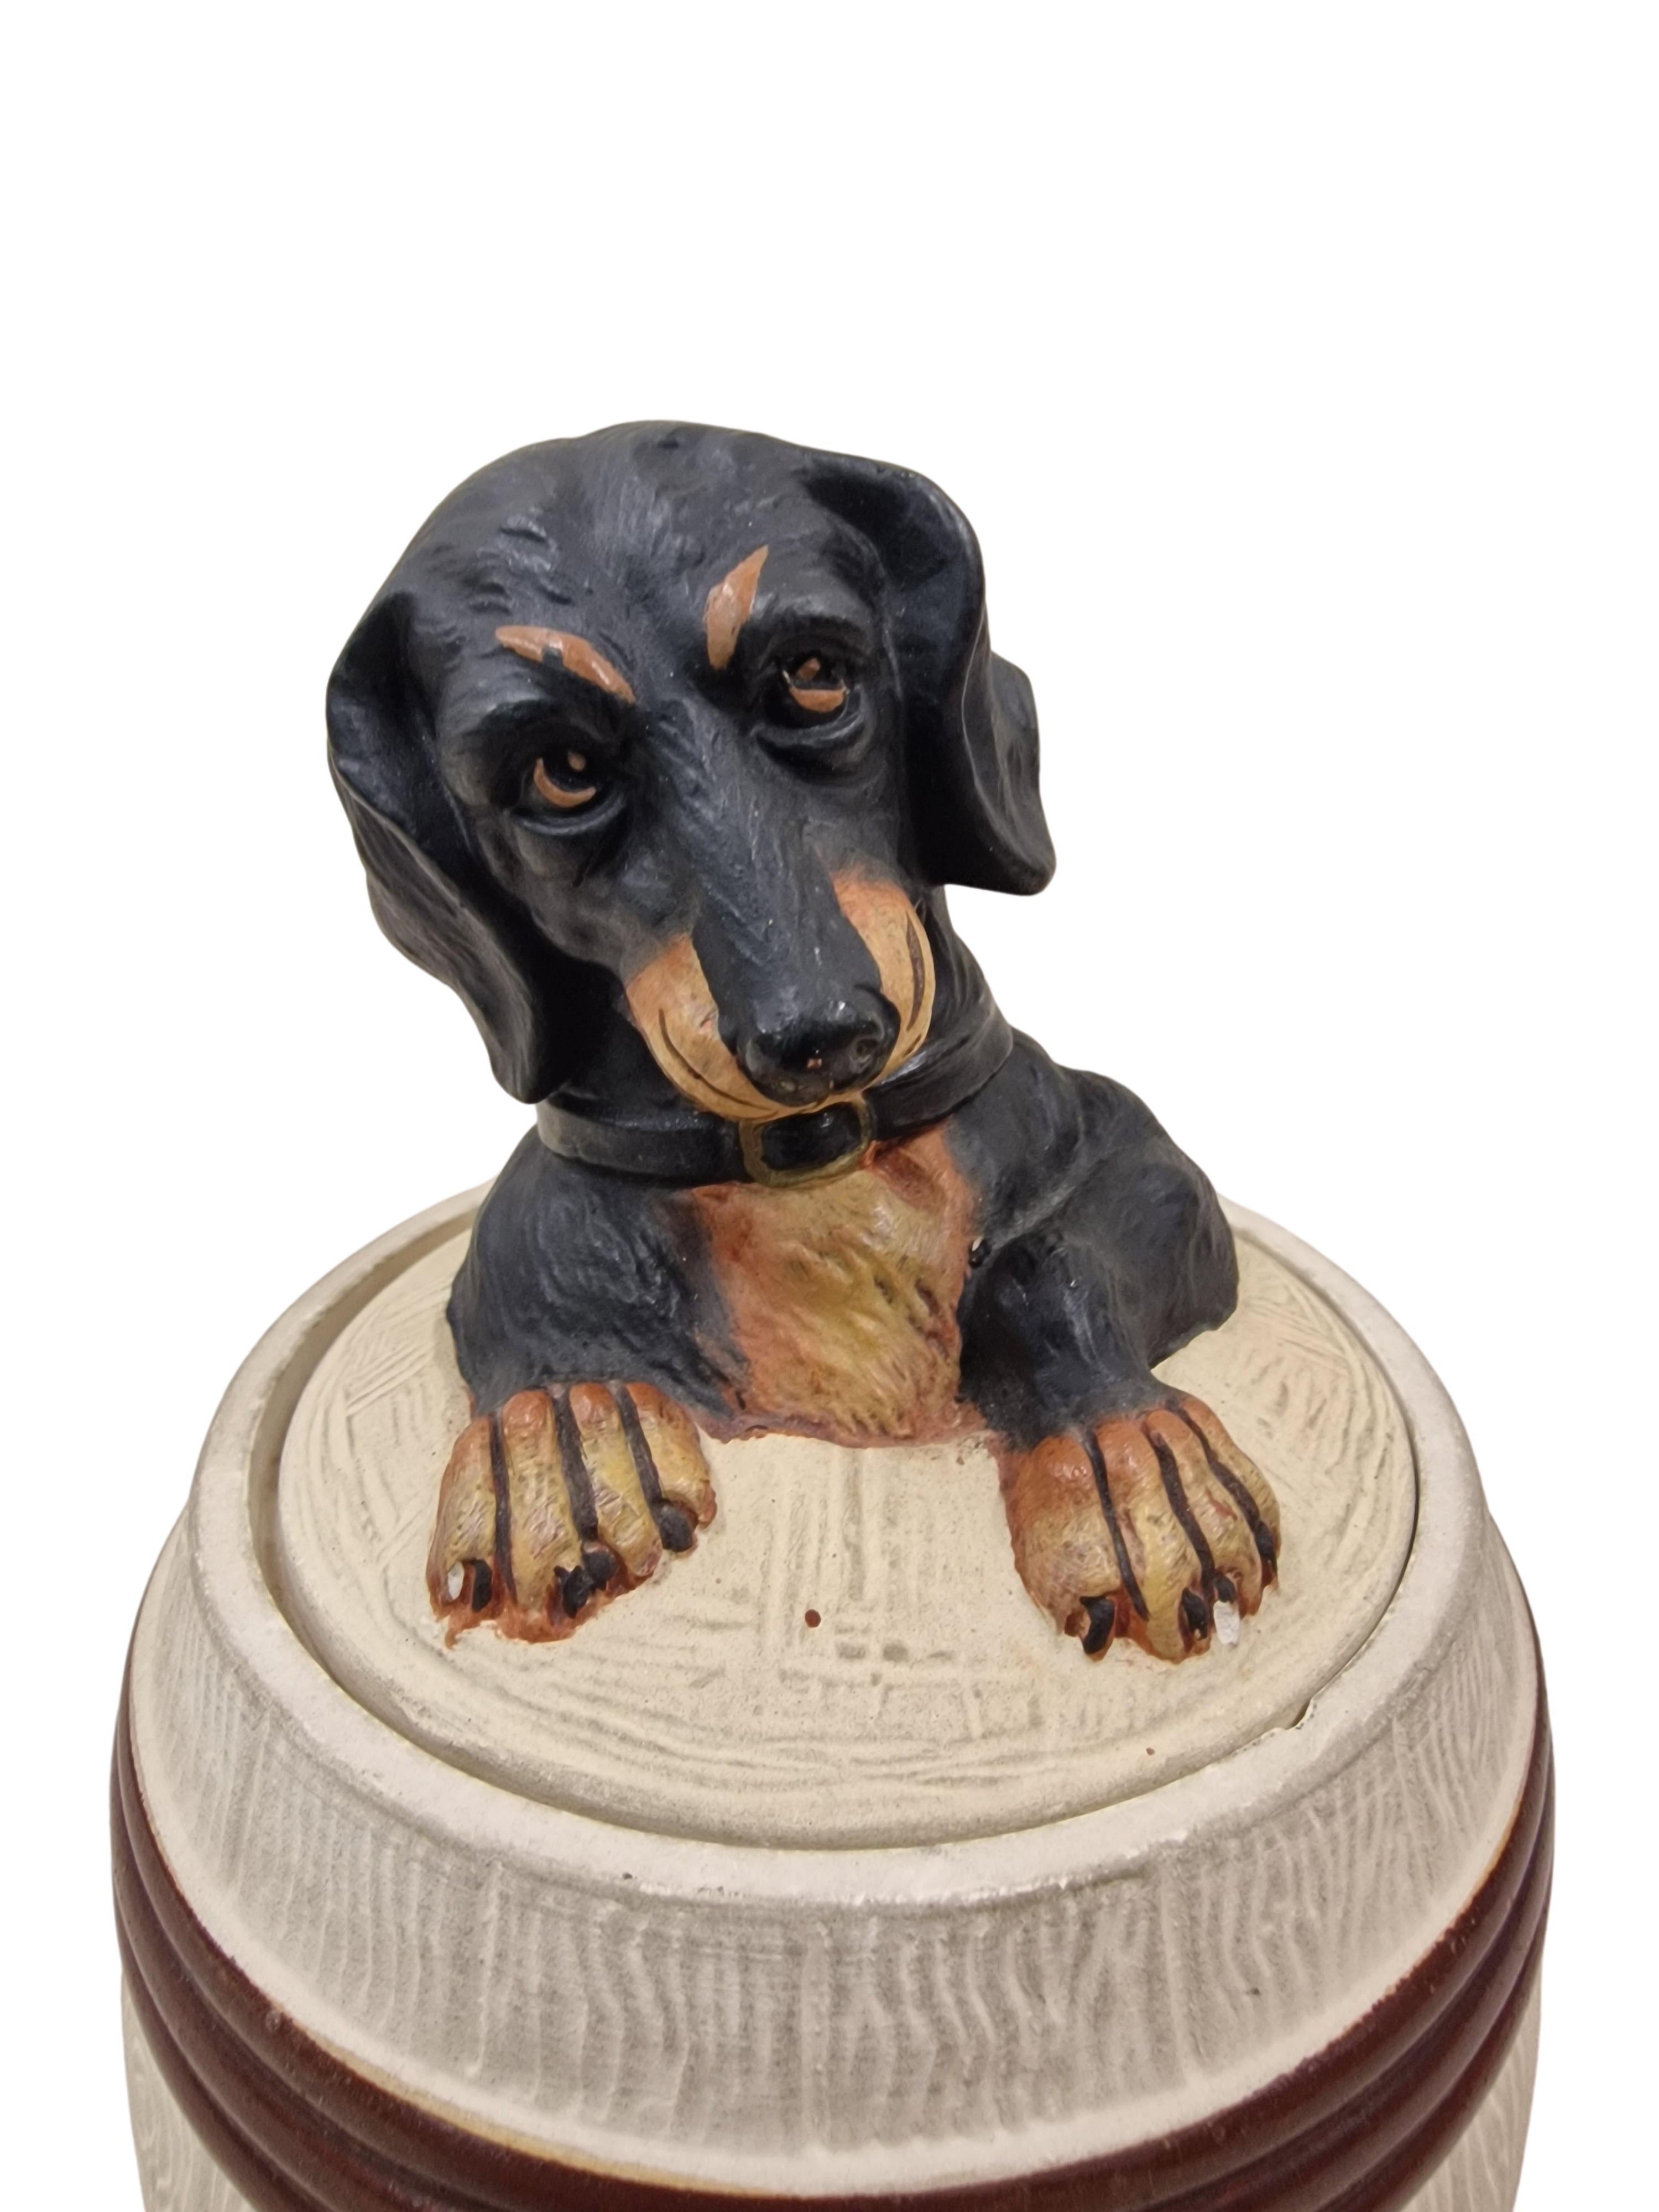 Extraordinary, charming tobacco box, made in the 1920s, an original art deco piece, made by wellknown Johann Maresch, Czech Republic. 

The tobacco tin is designed like a wooden barrel tied with metal hoops. Above - on the lid, is a dachshund, it